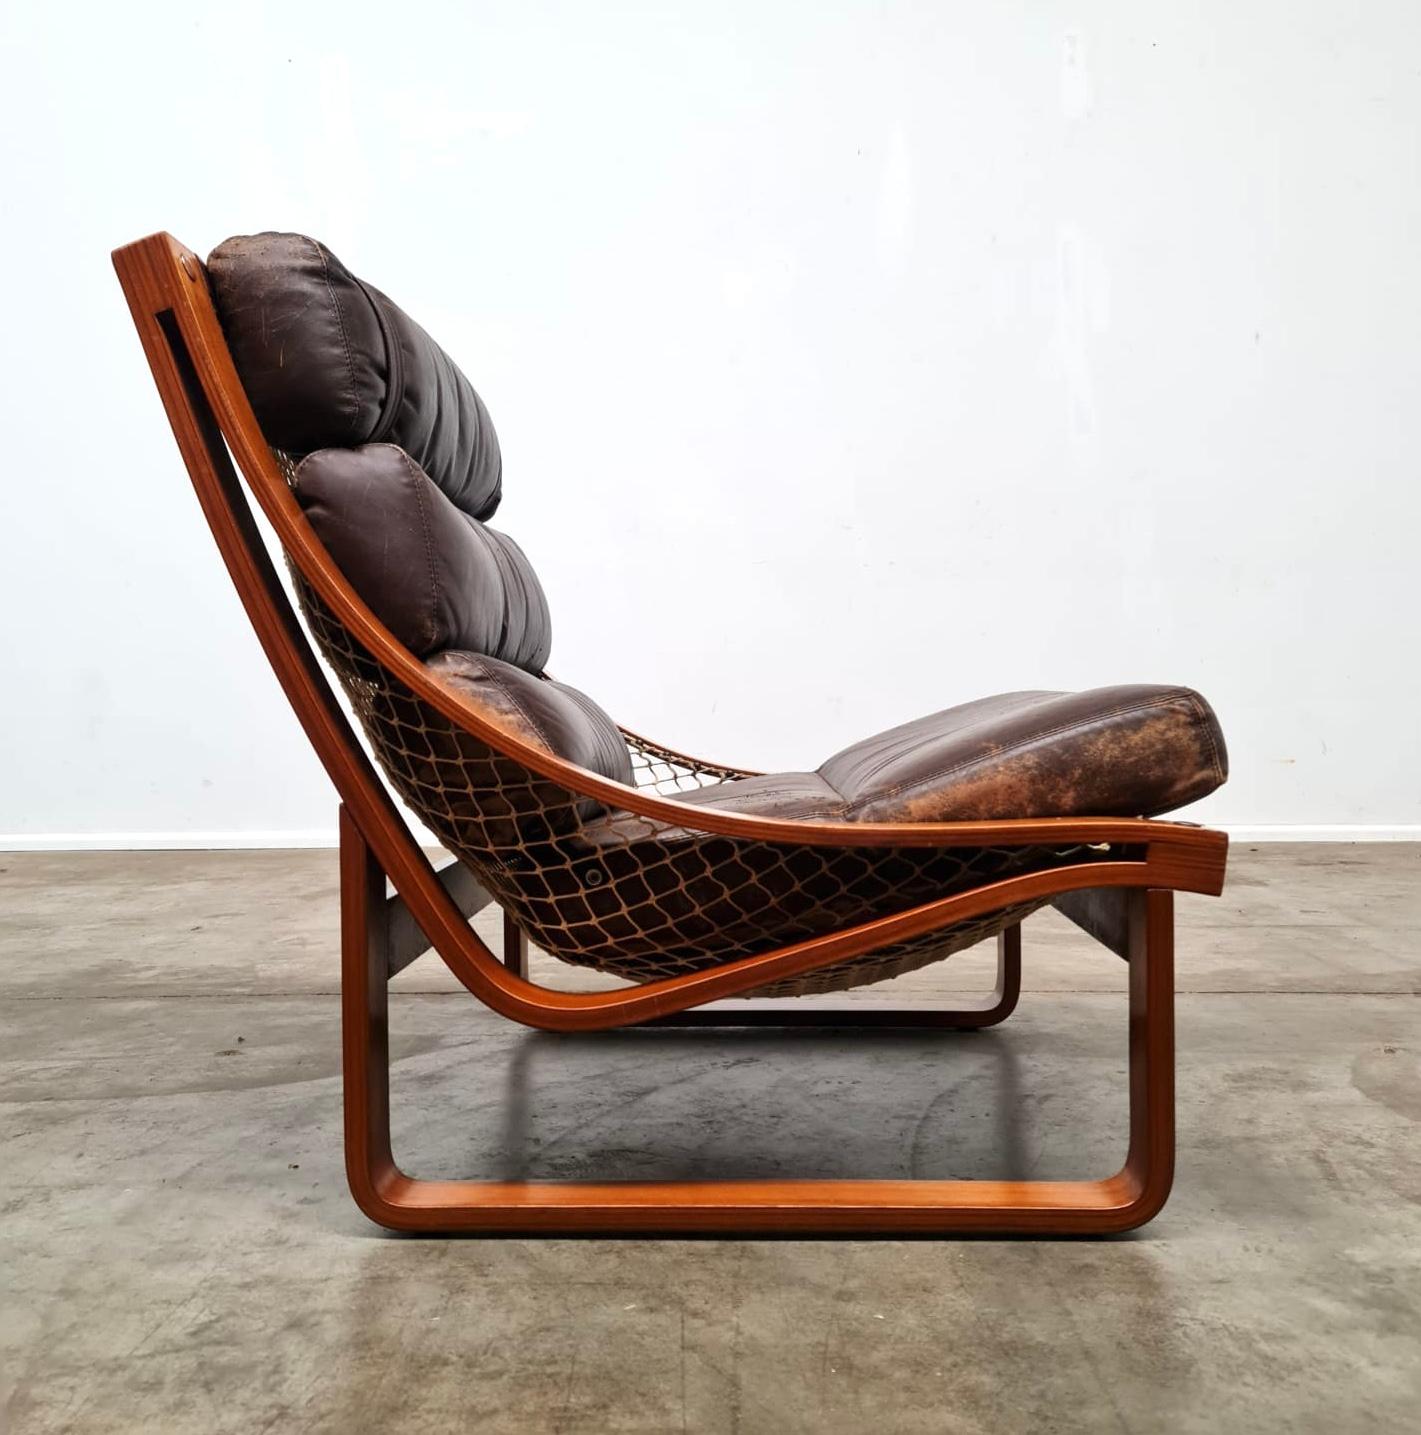 Tessa T4 lounge designed for Tessa Furniture by Fred Lowen. Bent ply Teak frames with a suspended hammock back supporting original leather cushions.

Frames have been Cleaned and polished. The leather has been cleaned and conditioned with one small